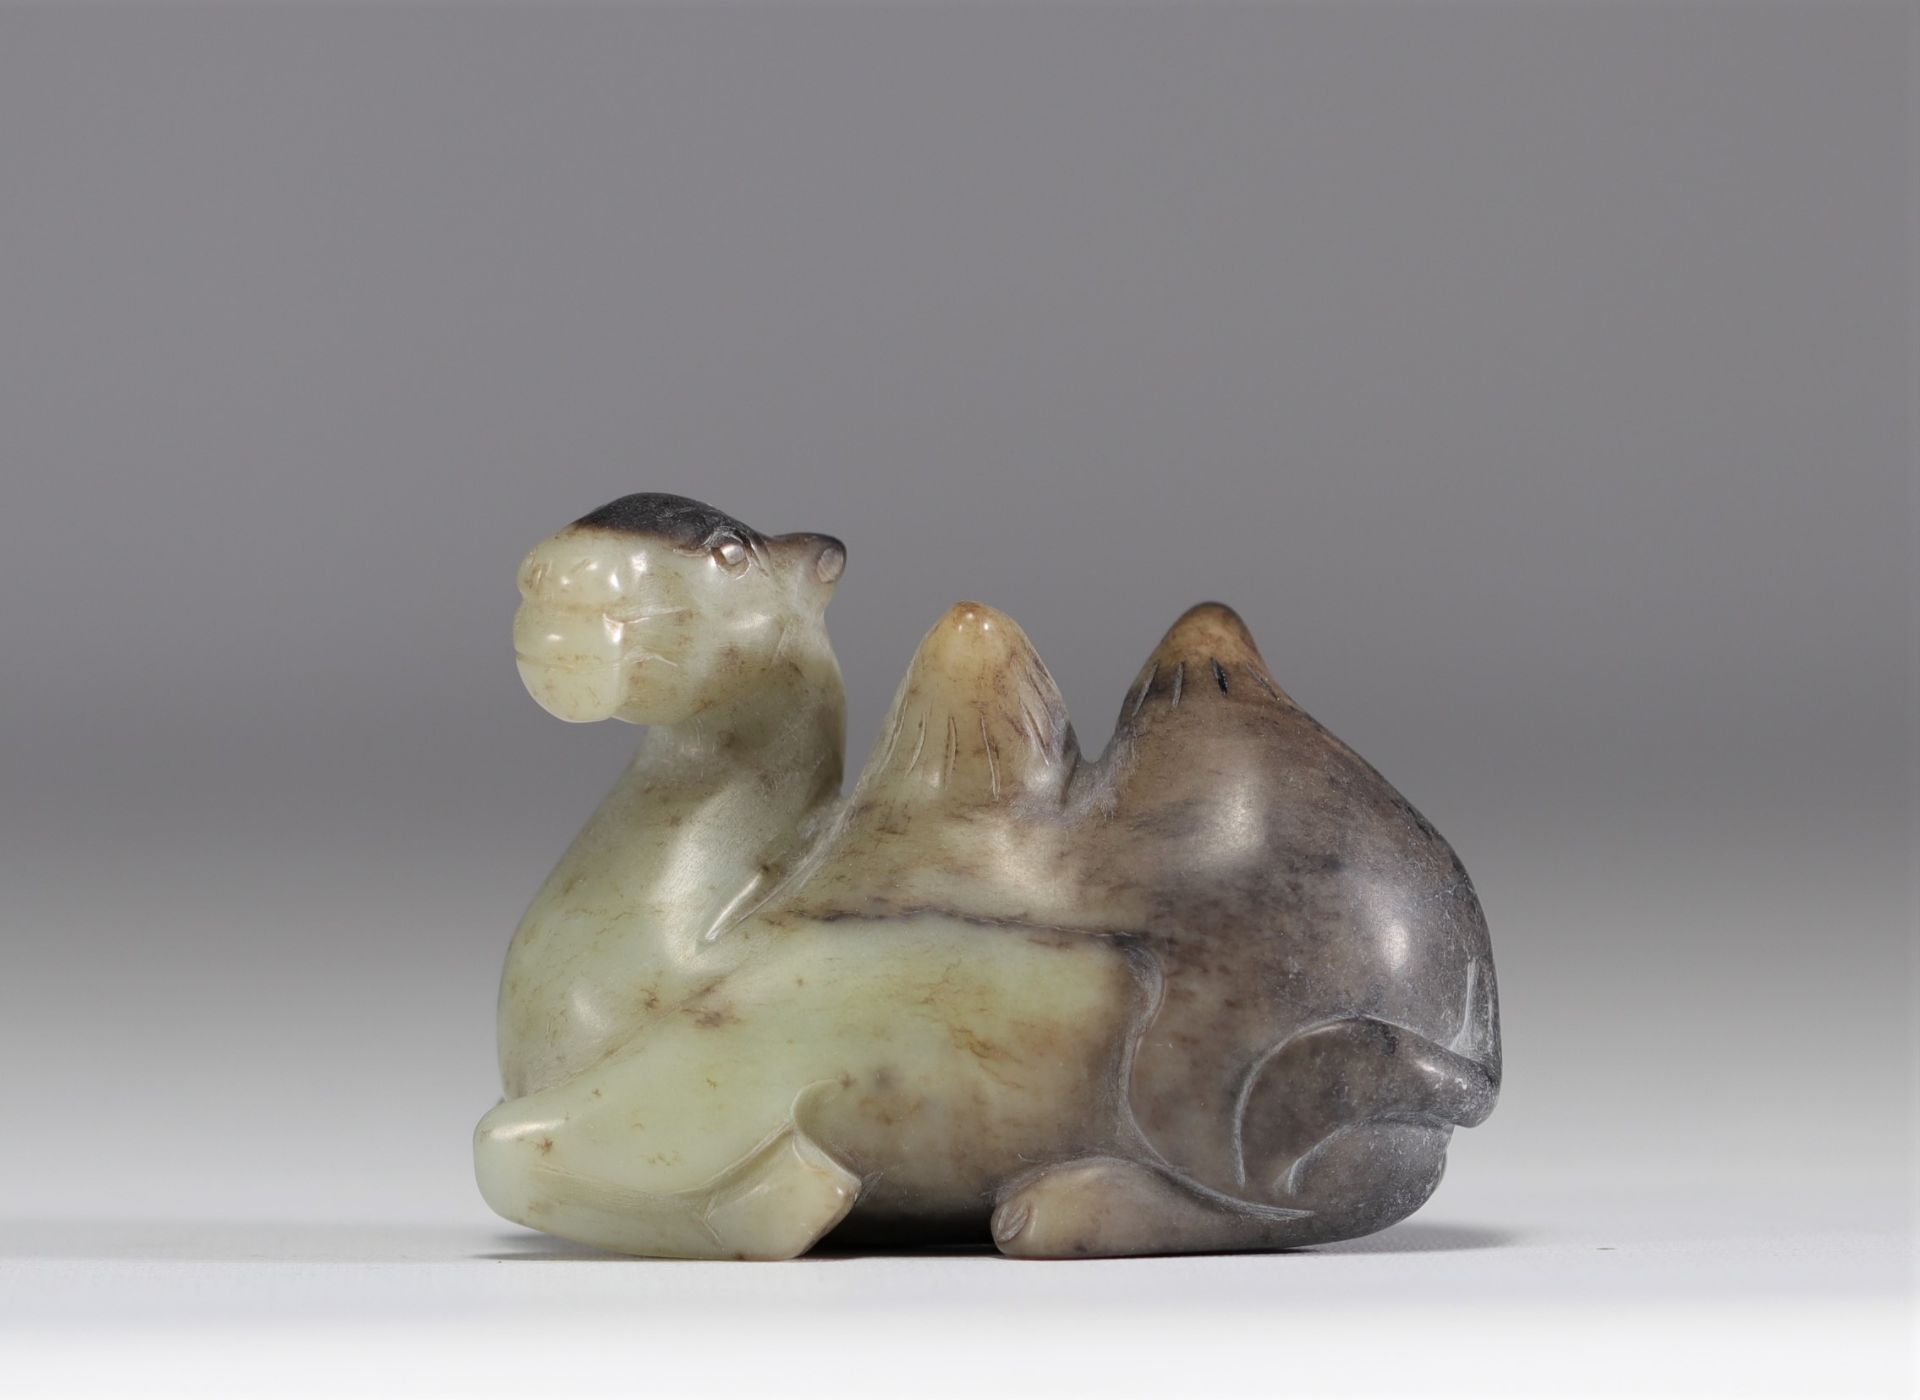 Green and black jade "camel" sculpture from the Qing period (æ¸…æœ)